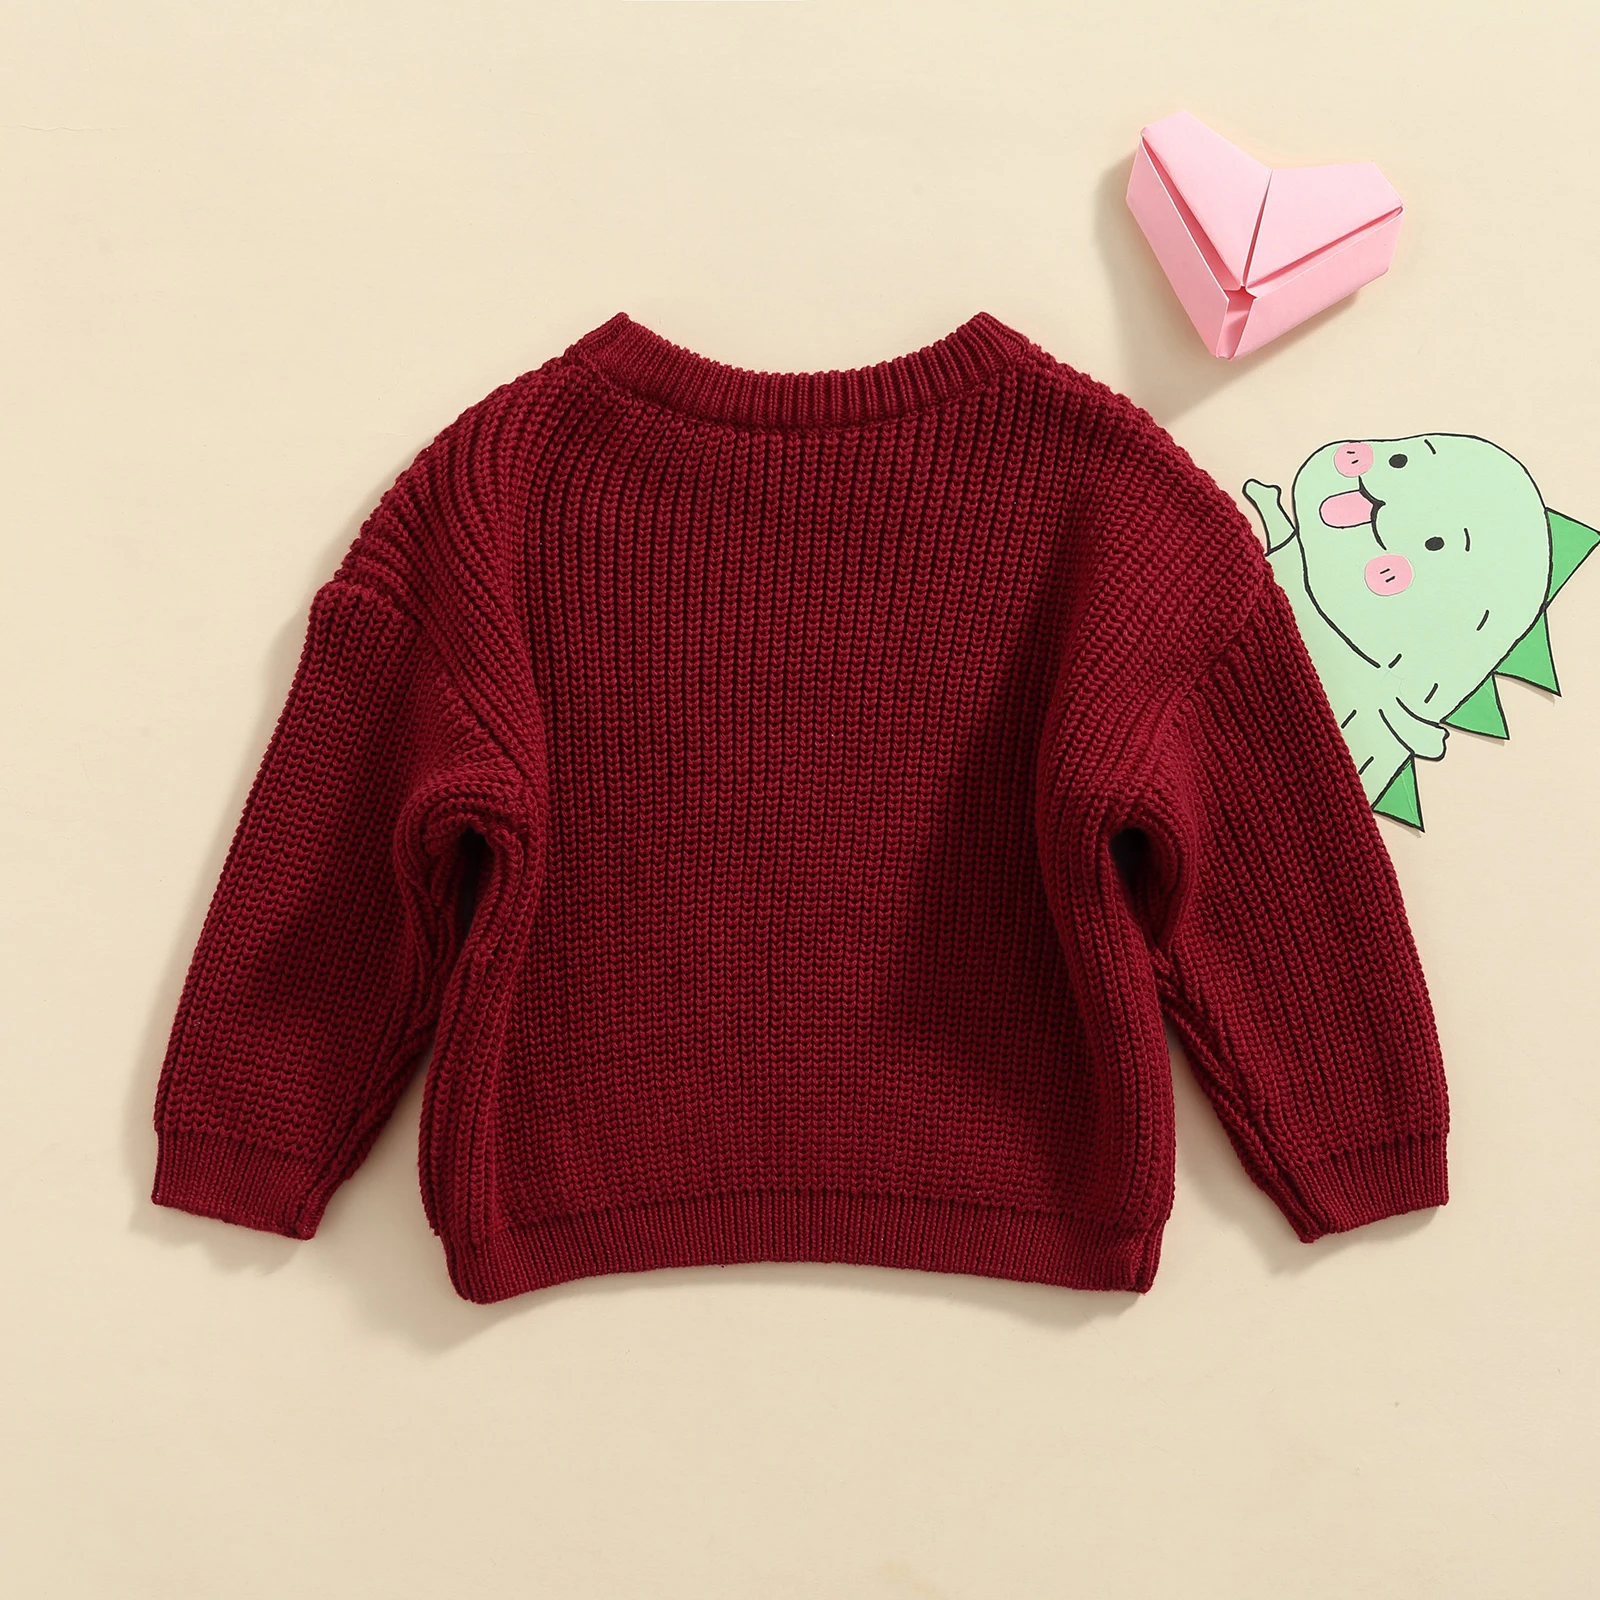 Infant Toddler Baby Girls Boys Round Neck Sweaters, Winter Warm Long Sleeve Candy Color Knit Pullovers 2021 New Fashion images - 6